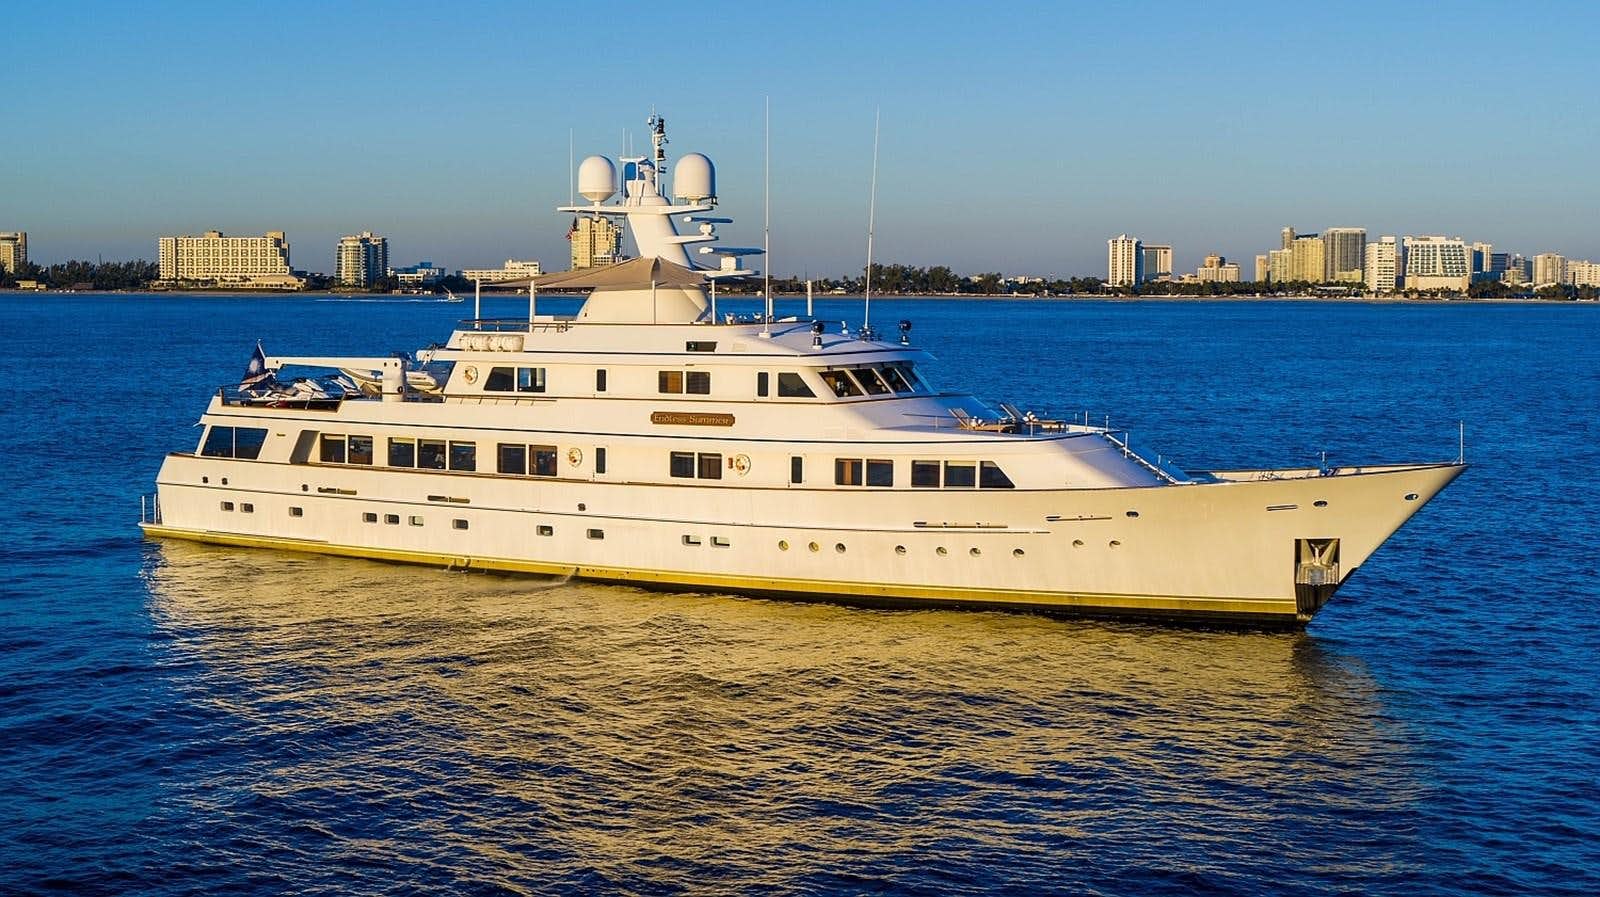 ENDLESS SUMMER Yacht for Sale in United States, 156' (47.54m) 1991  FEADSHIP